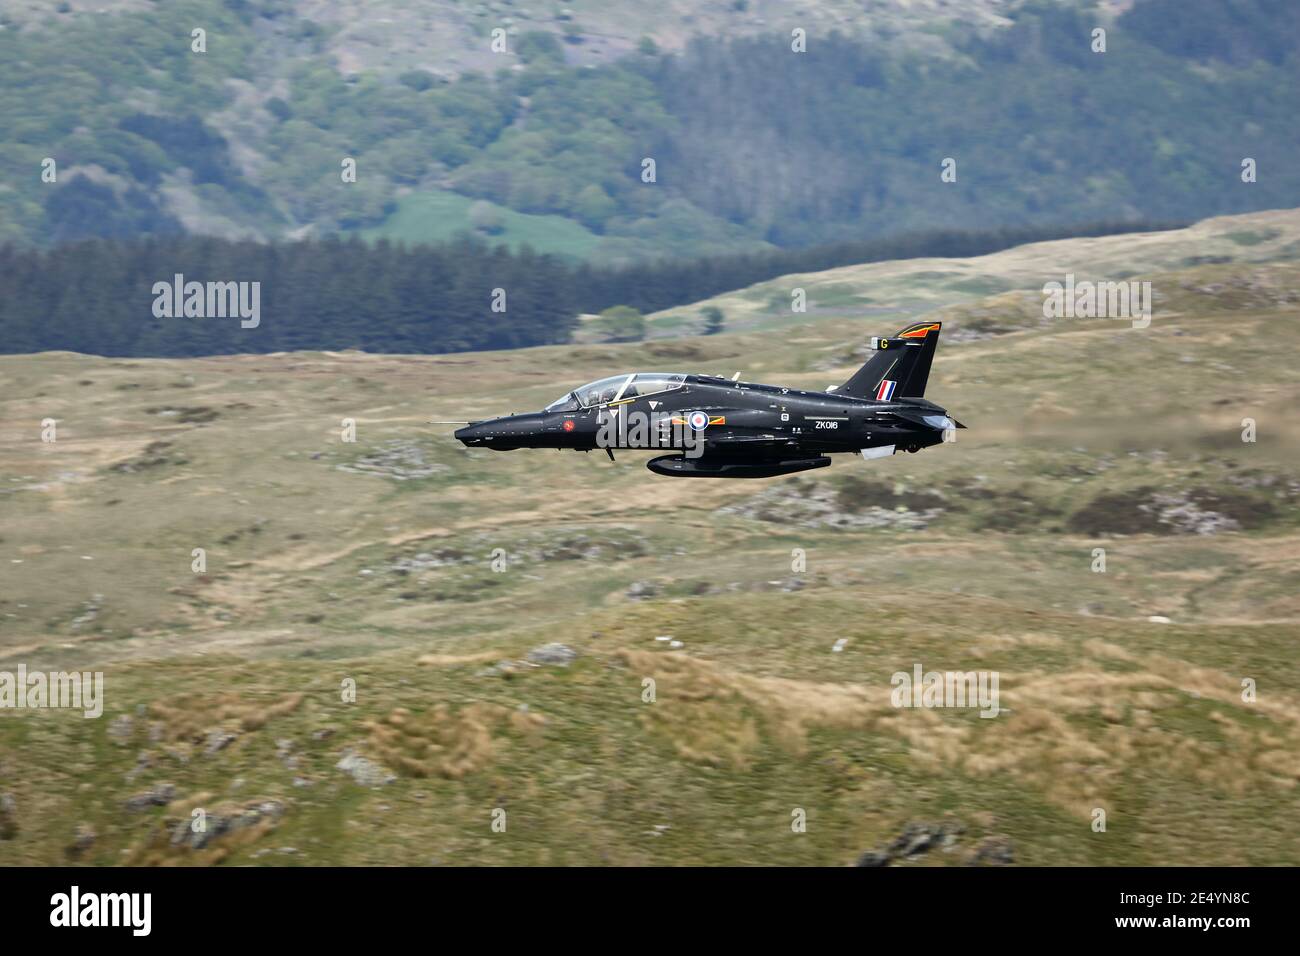 RAF Hawk T2 training aircraft on a low level flight in the mach loop area of Wales, UK. Stock Photo